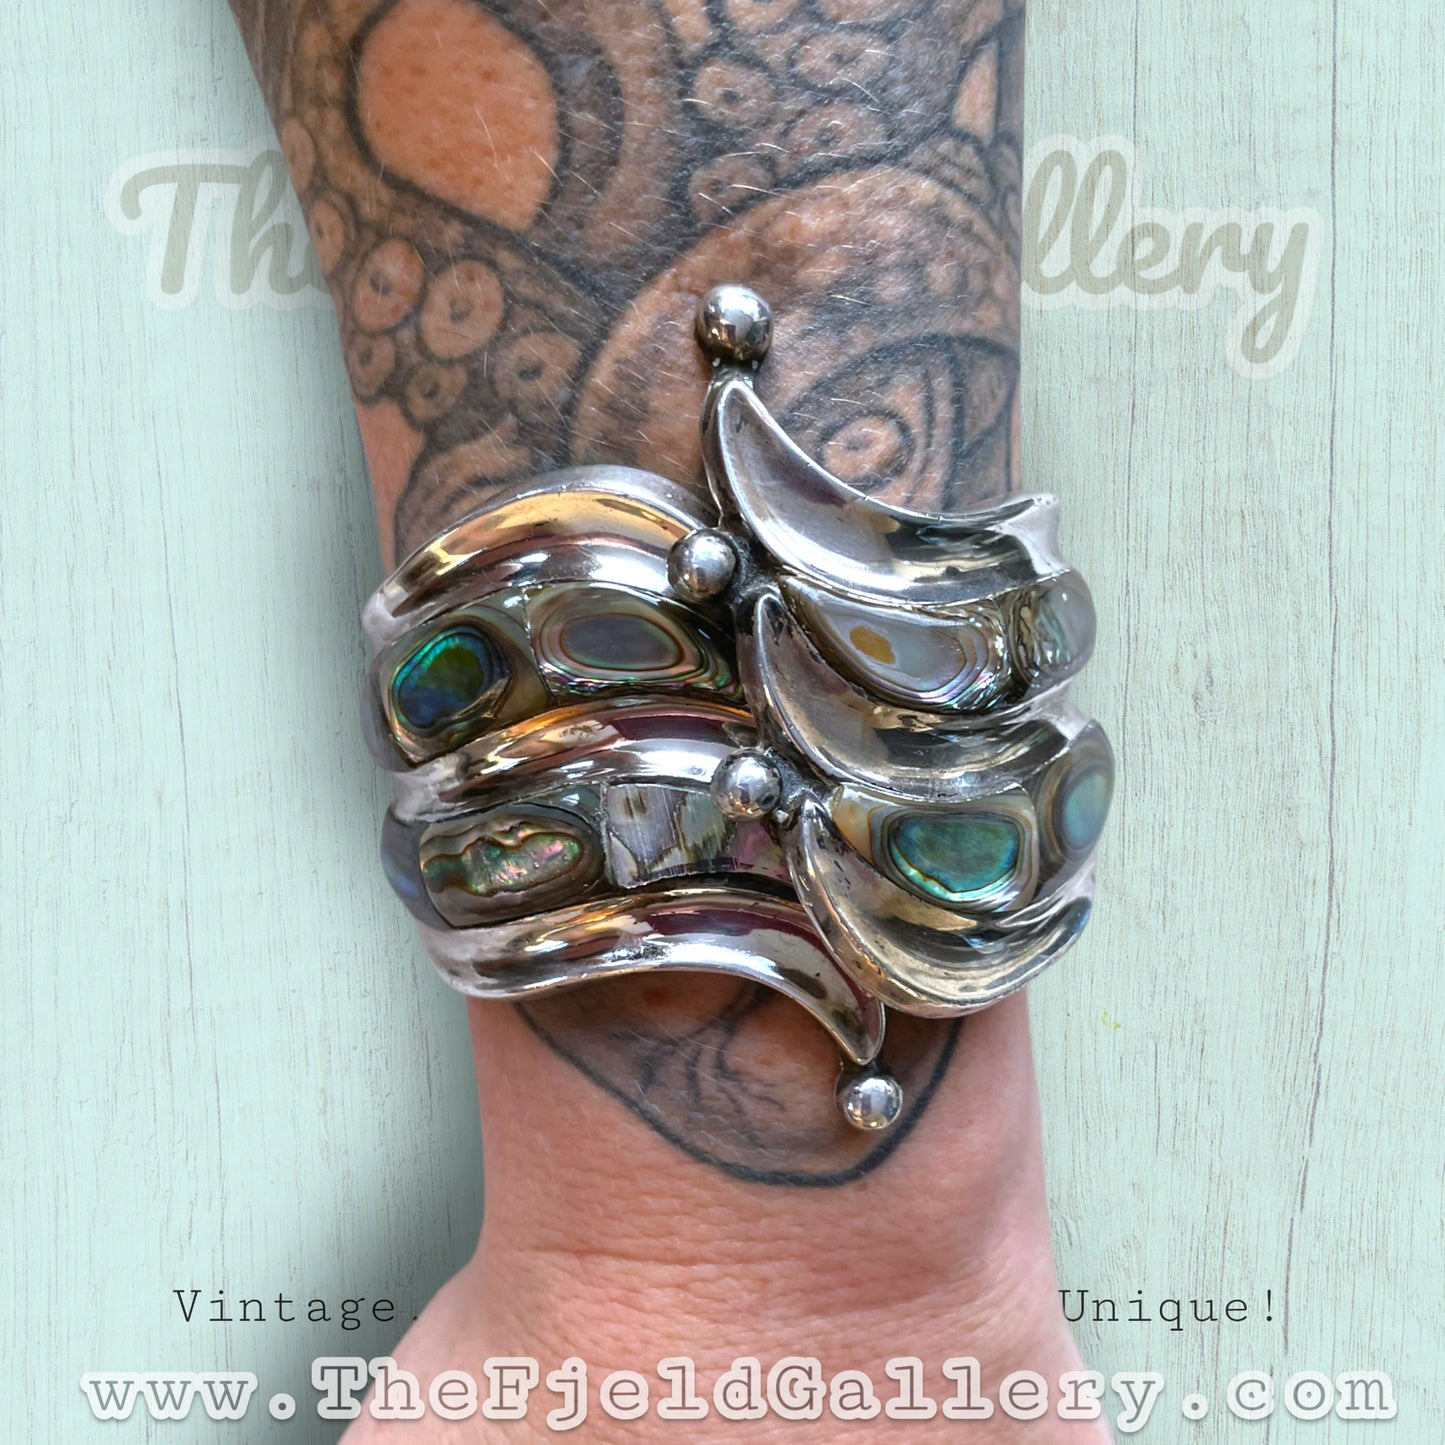 Vintage Sterling Silver & Abalone Mexican Hinged Clamper Bracelet